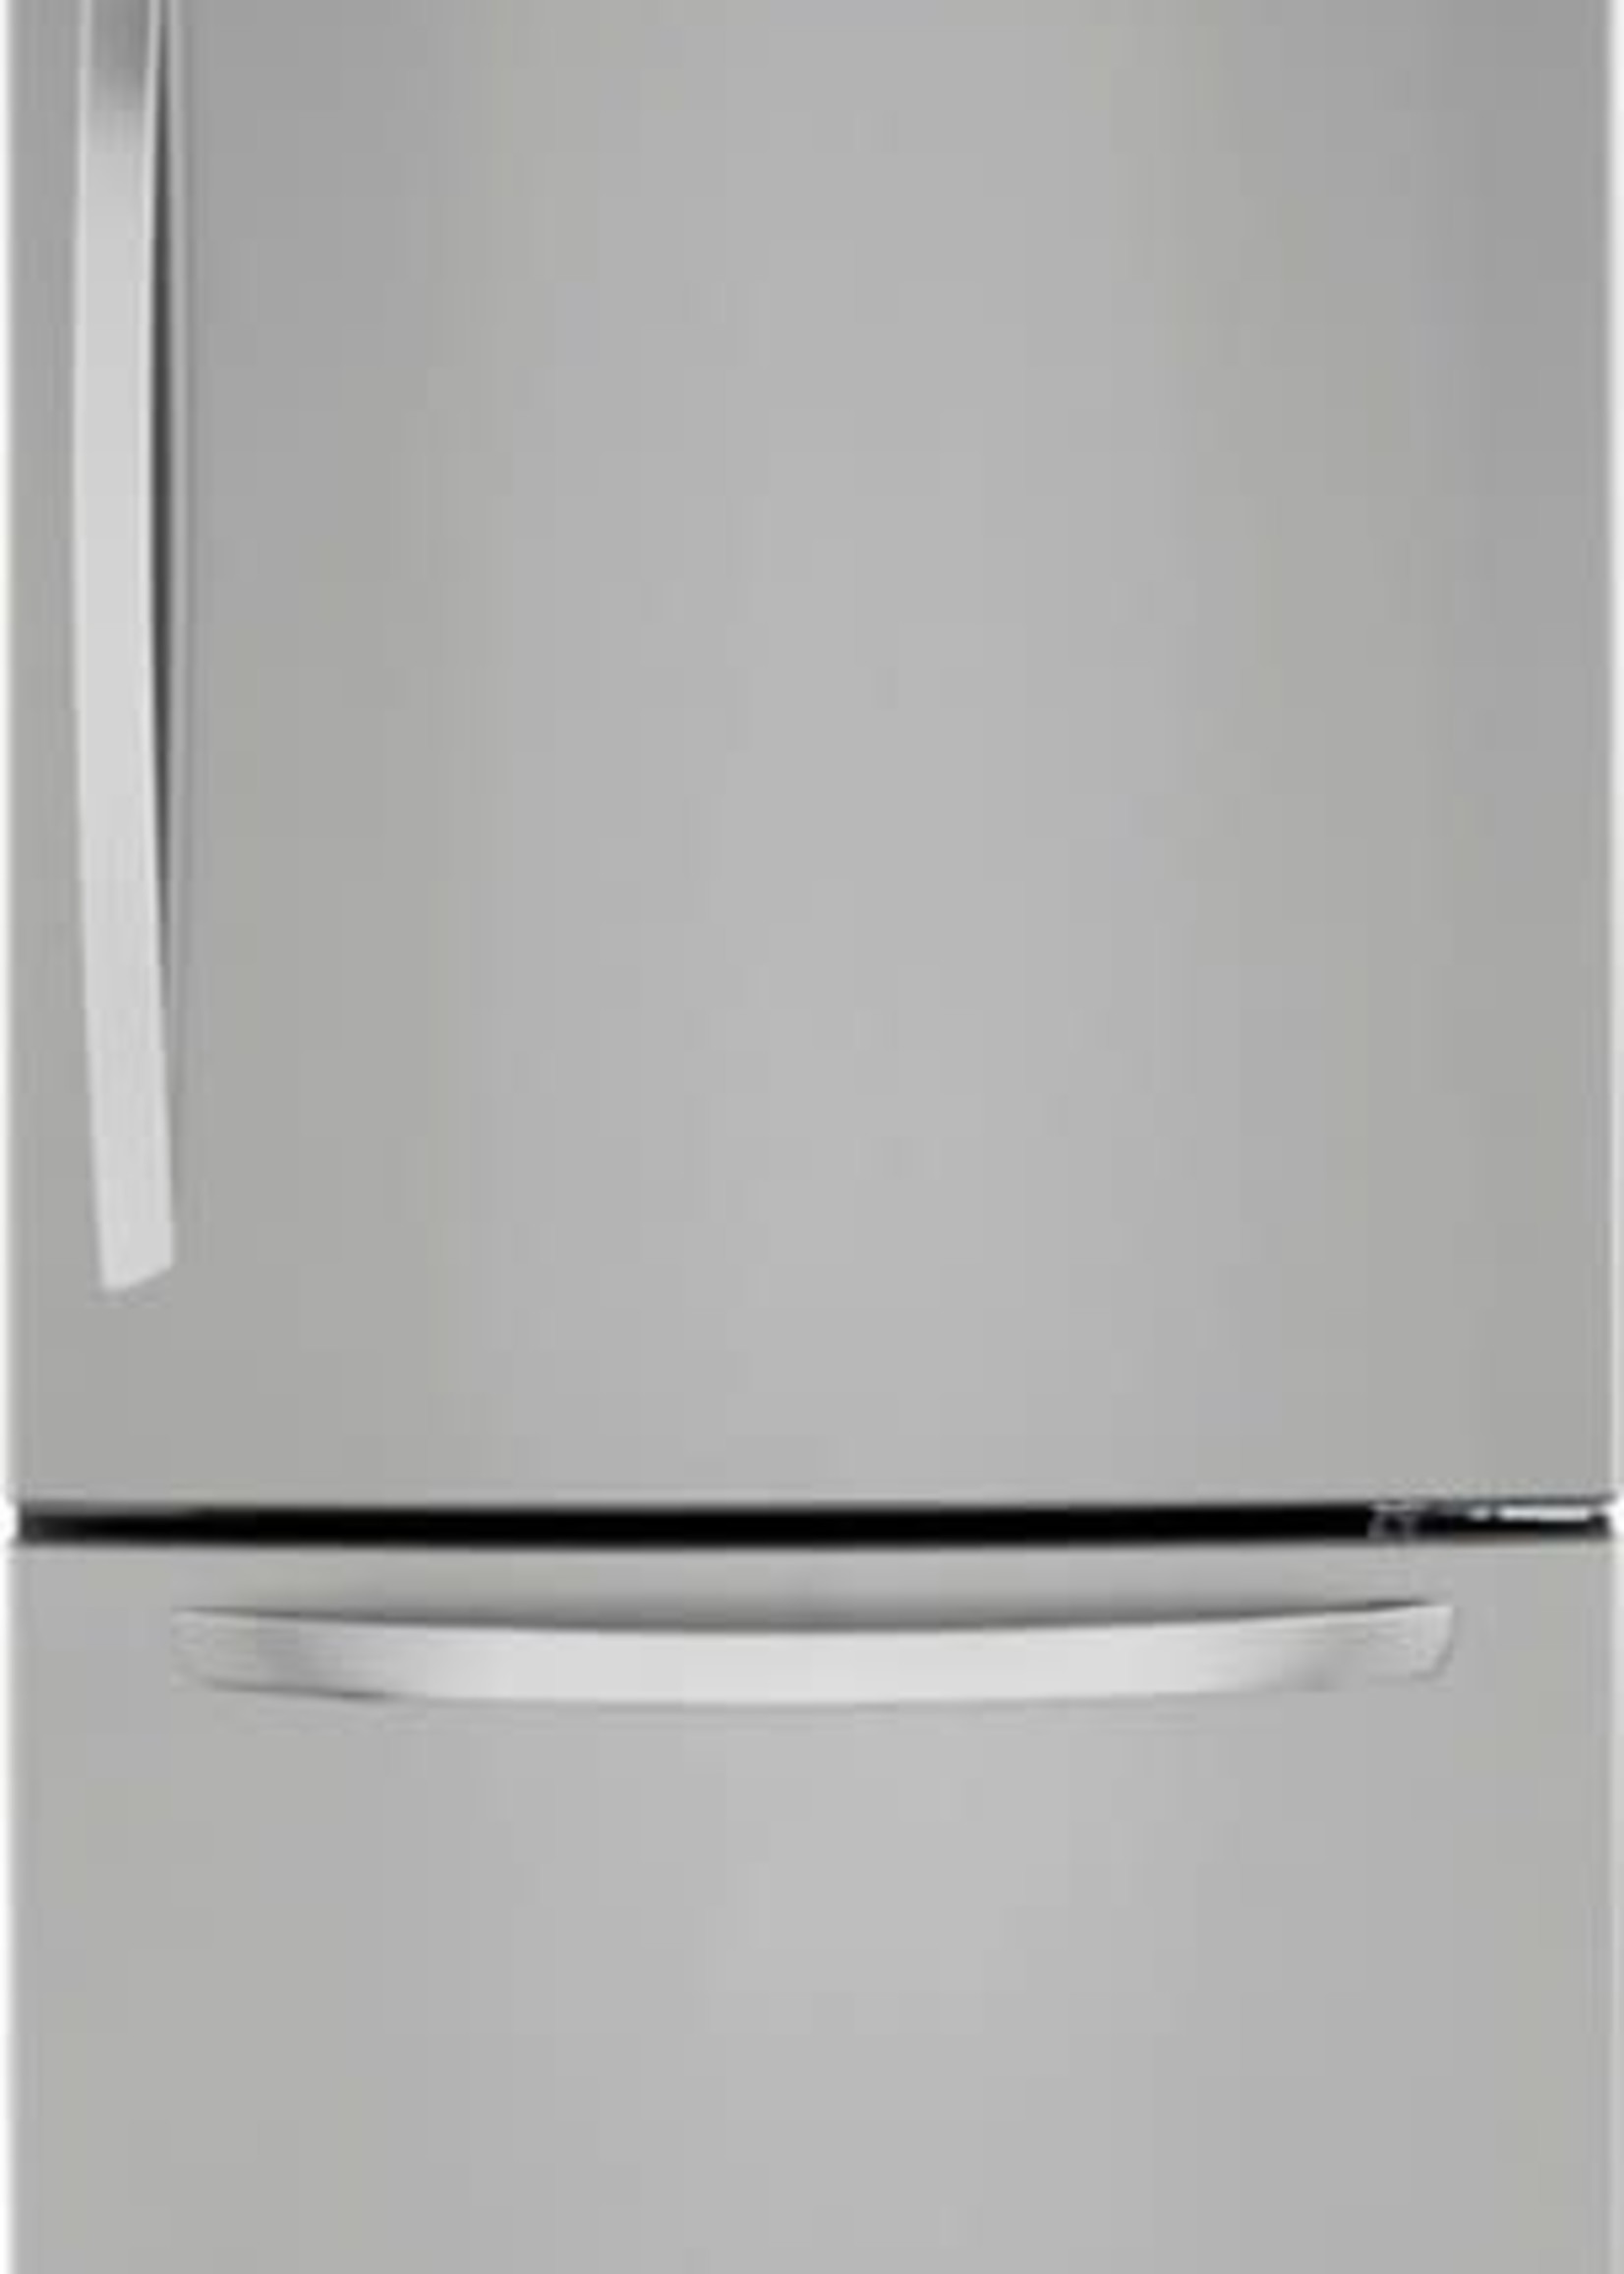 LG *LG  LRDCS2603S/00  25.50 cu. ft. Bottom Freezer Refrigerator in PrintProof Stainless Steel with Filtered Ice and Smart Cooling